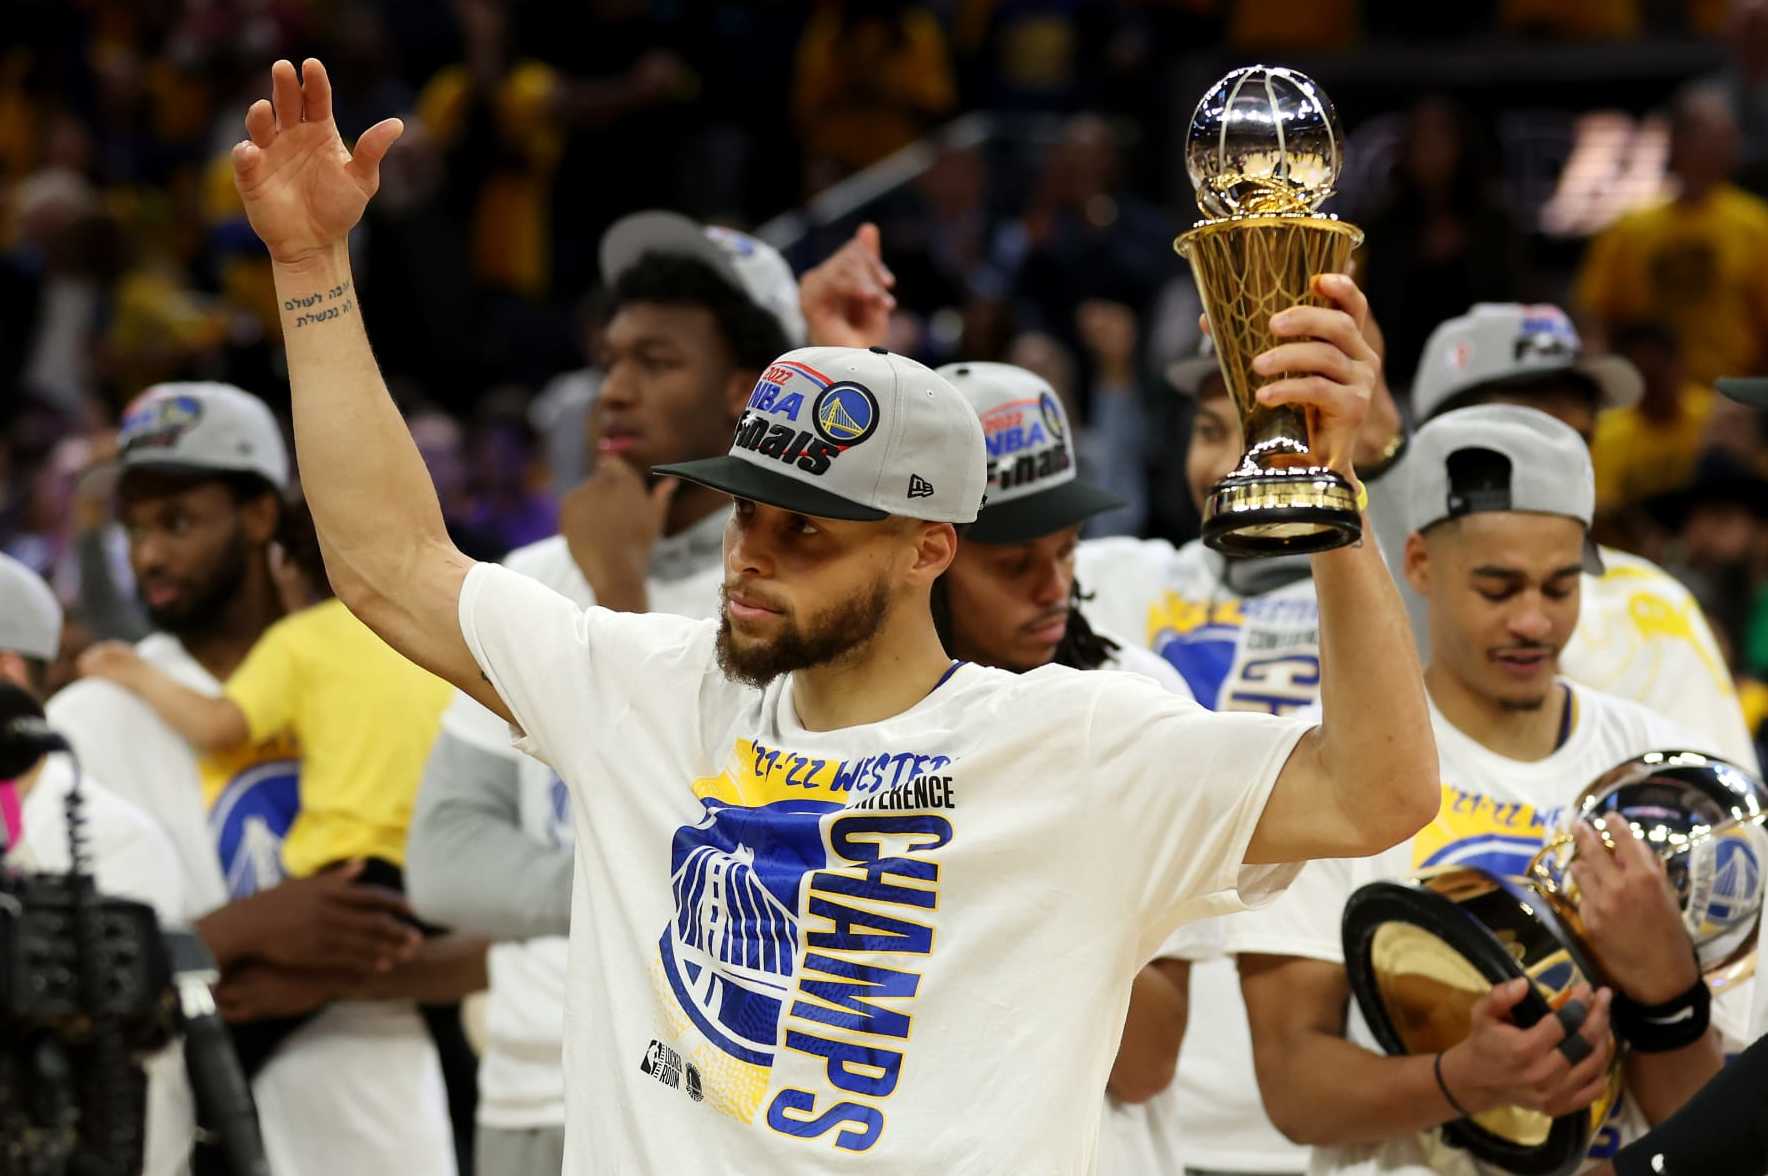 Golden State Warriors: S/I ranks Steph Curry as top guard in 2019